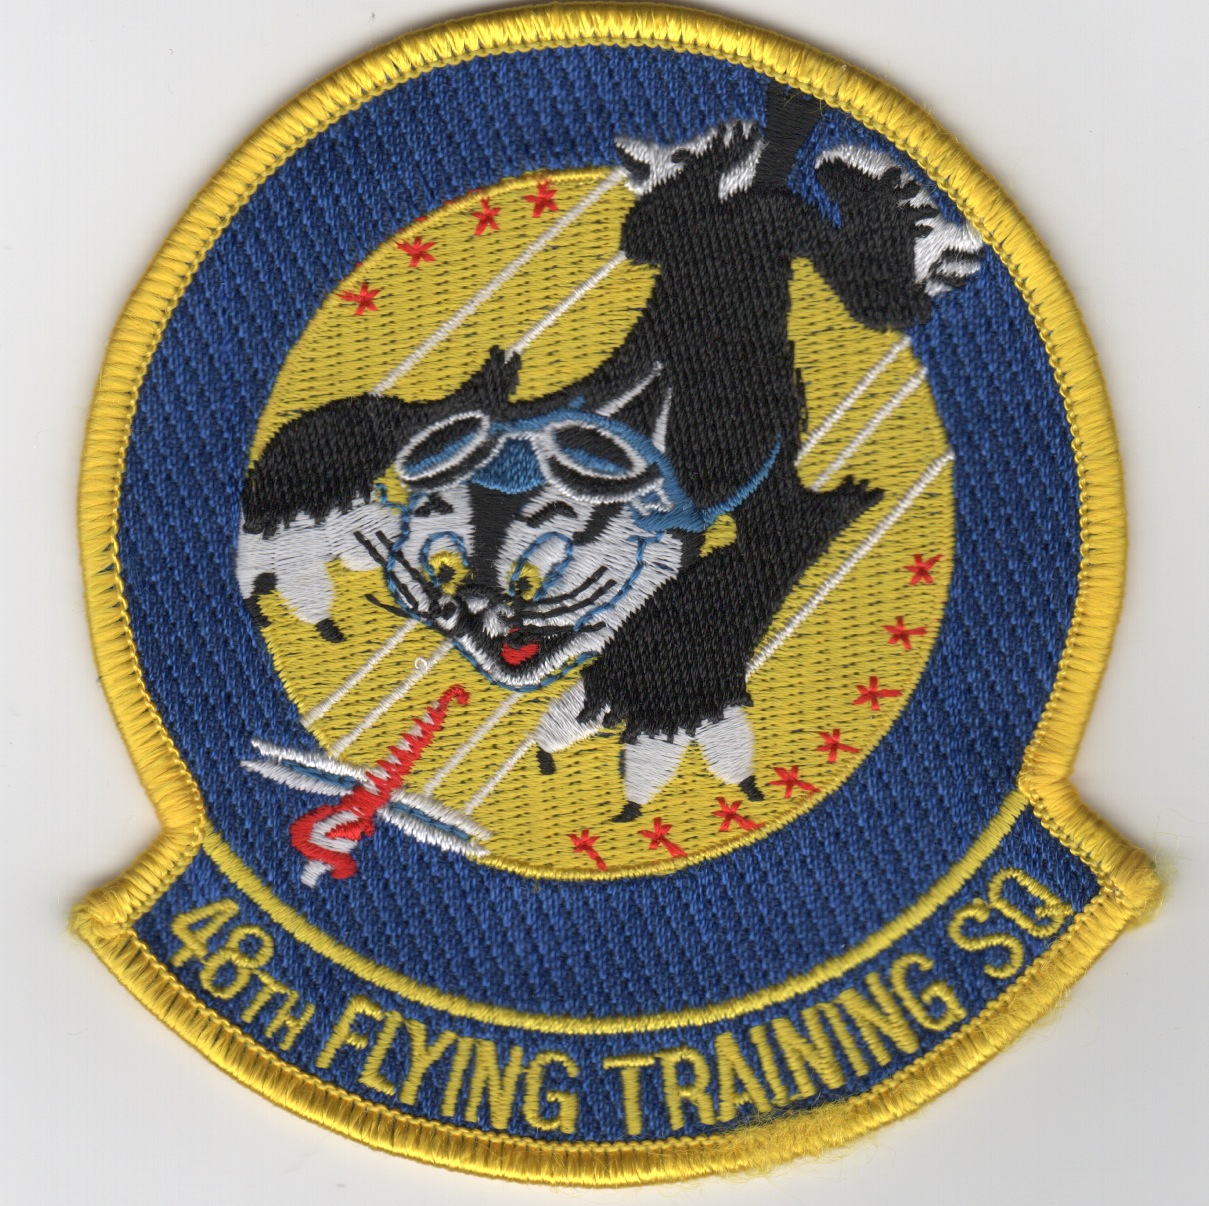 USAF Patch 23rd FLYING TRAINING SQUADRON 4" Diameter Size CEARF CLASS 17-02